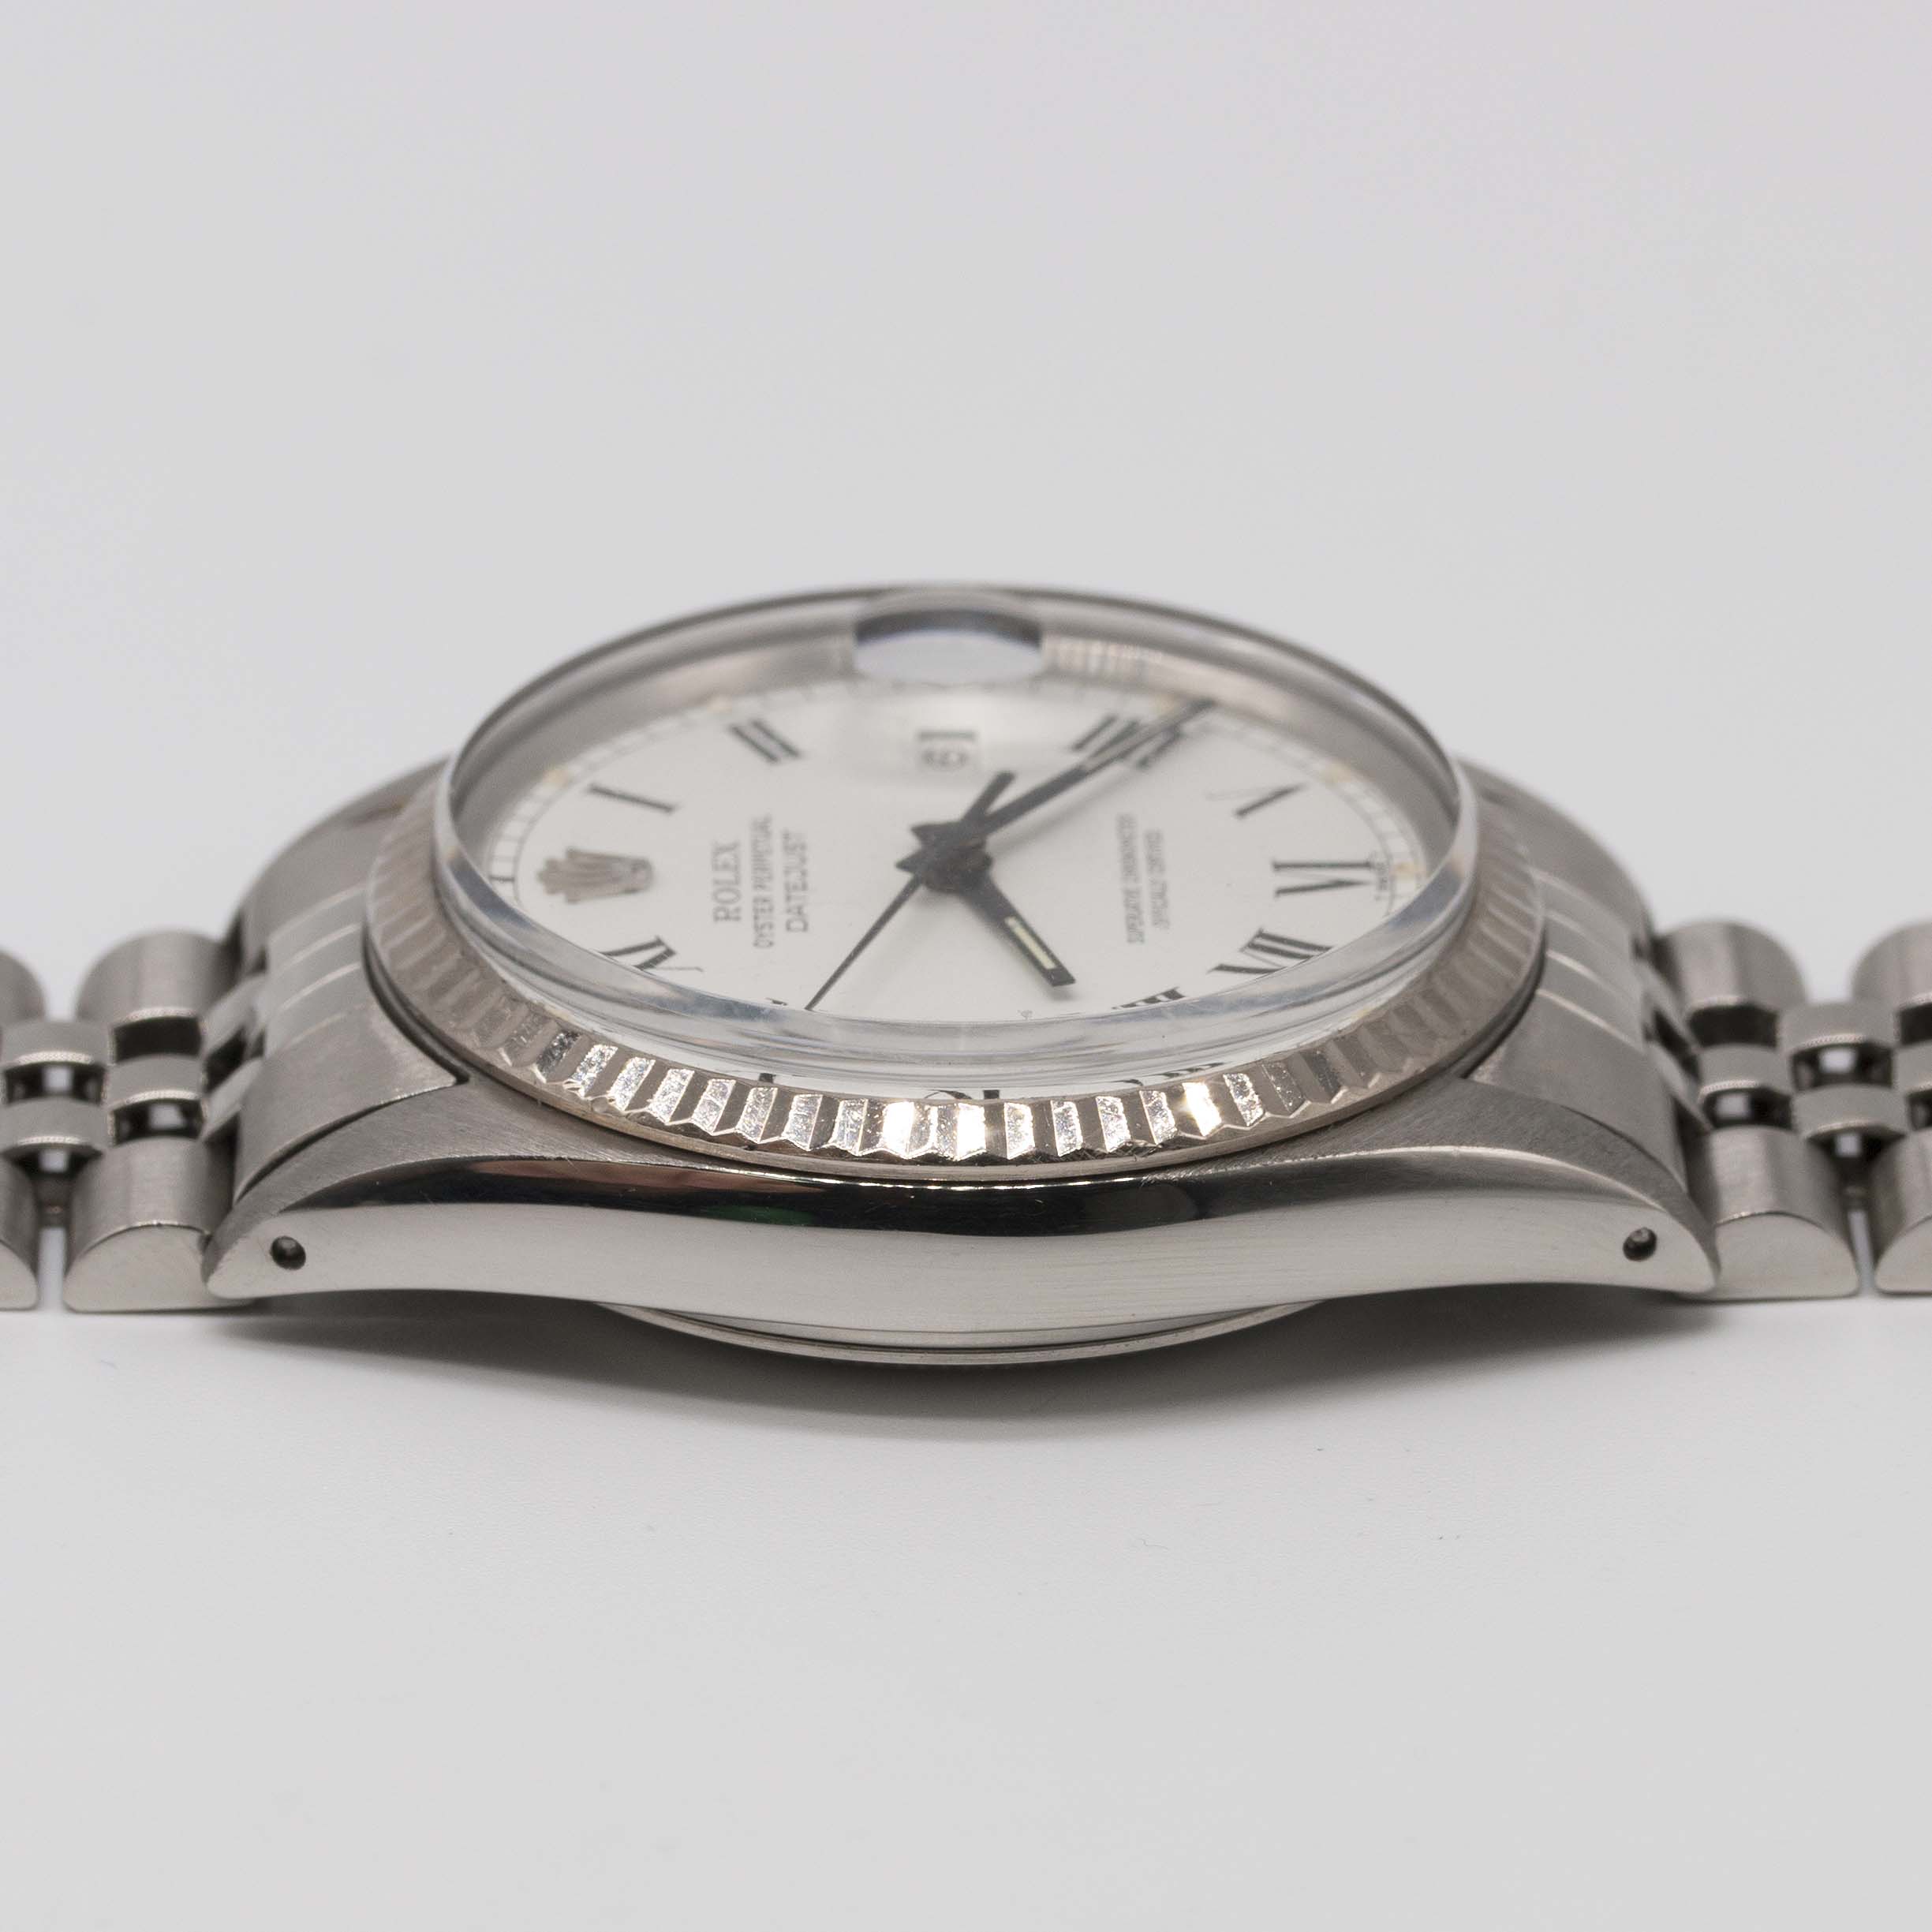 A GENTLEMAN'S STEEL & WHITE GOLD ROLEX OYSTER PERPETUAL DATEJUST BRACELET WATCH CIRCA 1984, REF. - Image 11 of 11